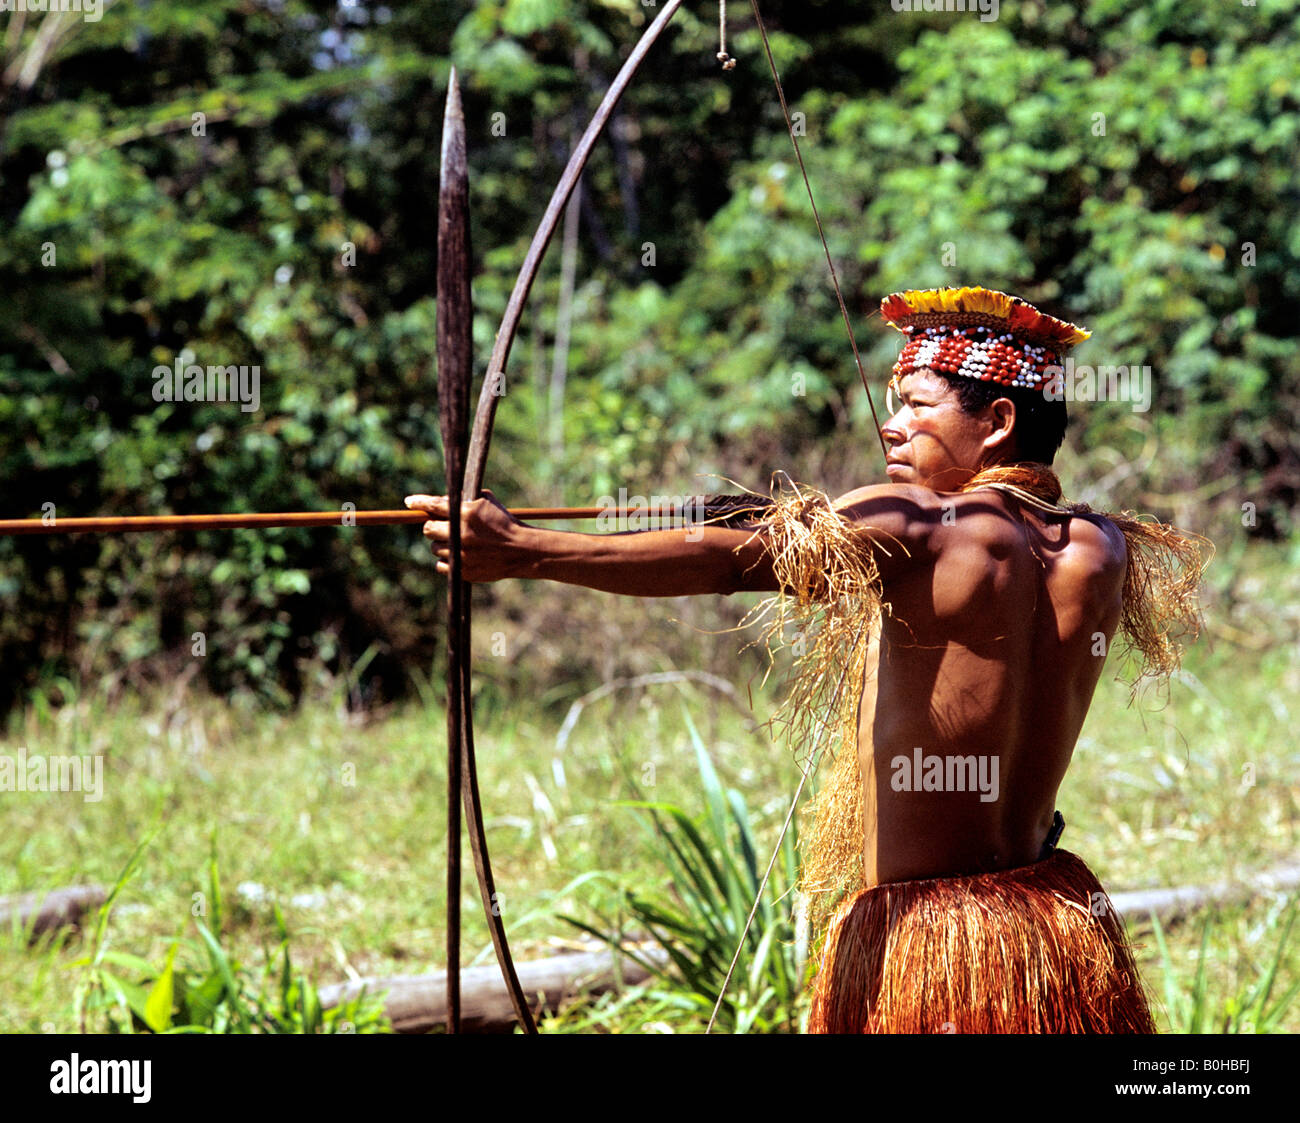 Indian, indio or indigenous warrior pointing a bow and arrow, Amazon, Iquitos, Peru, South America Stock Photo